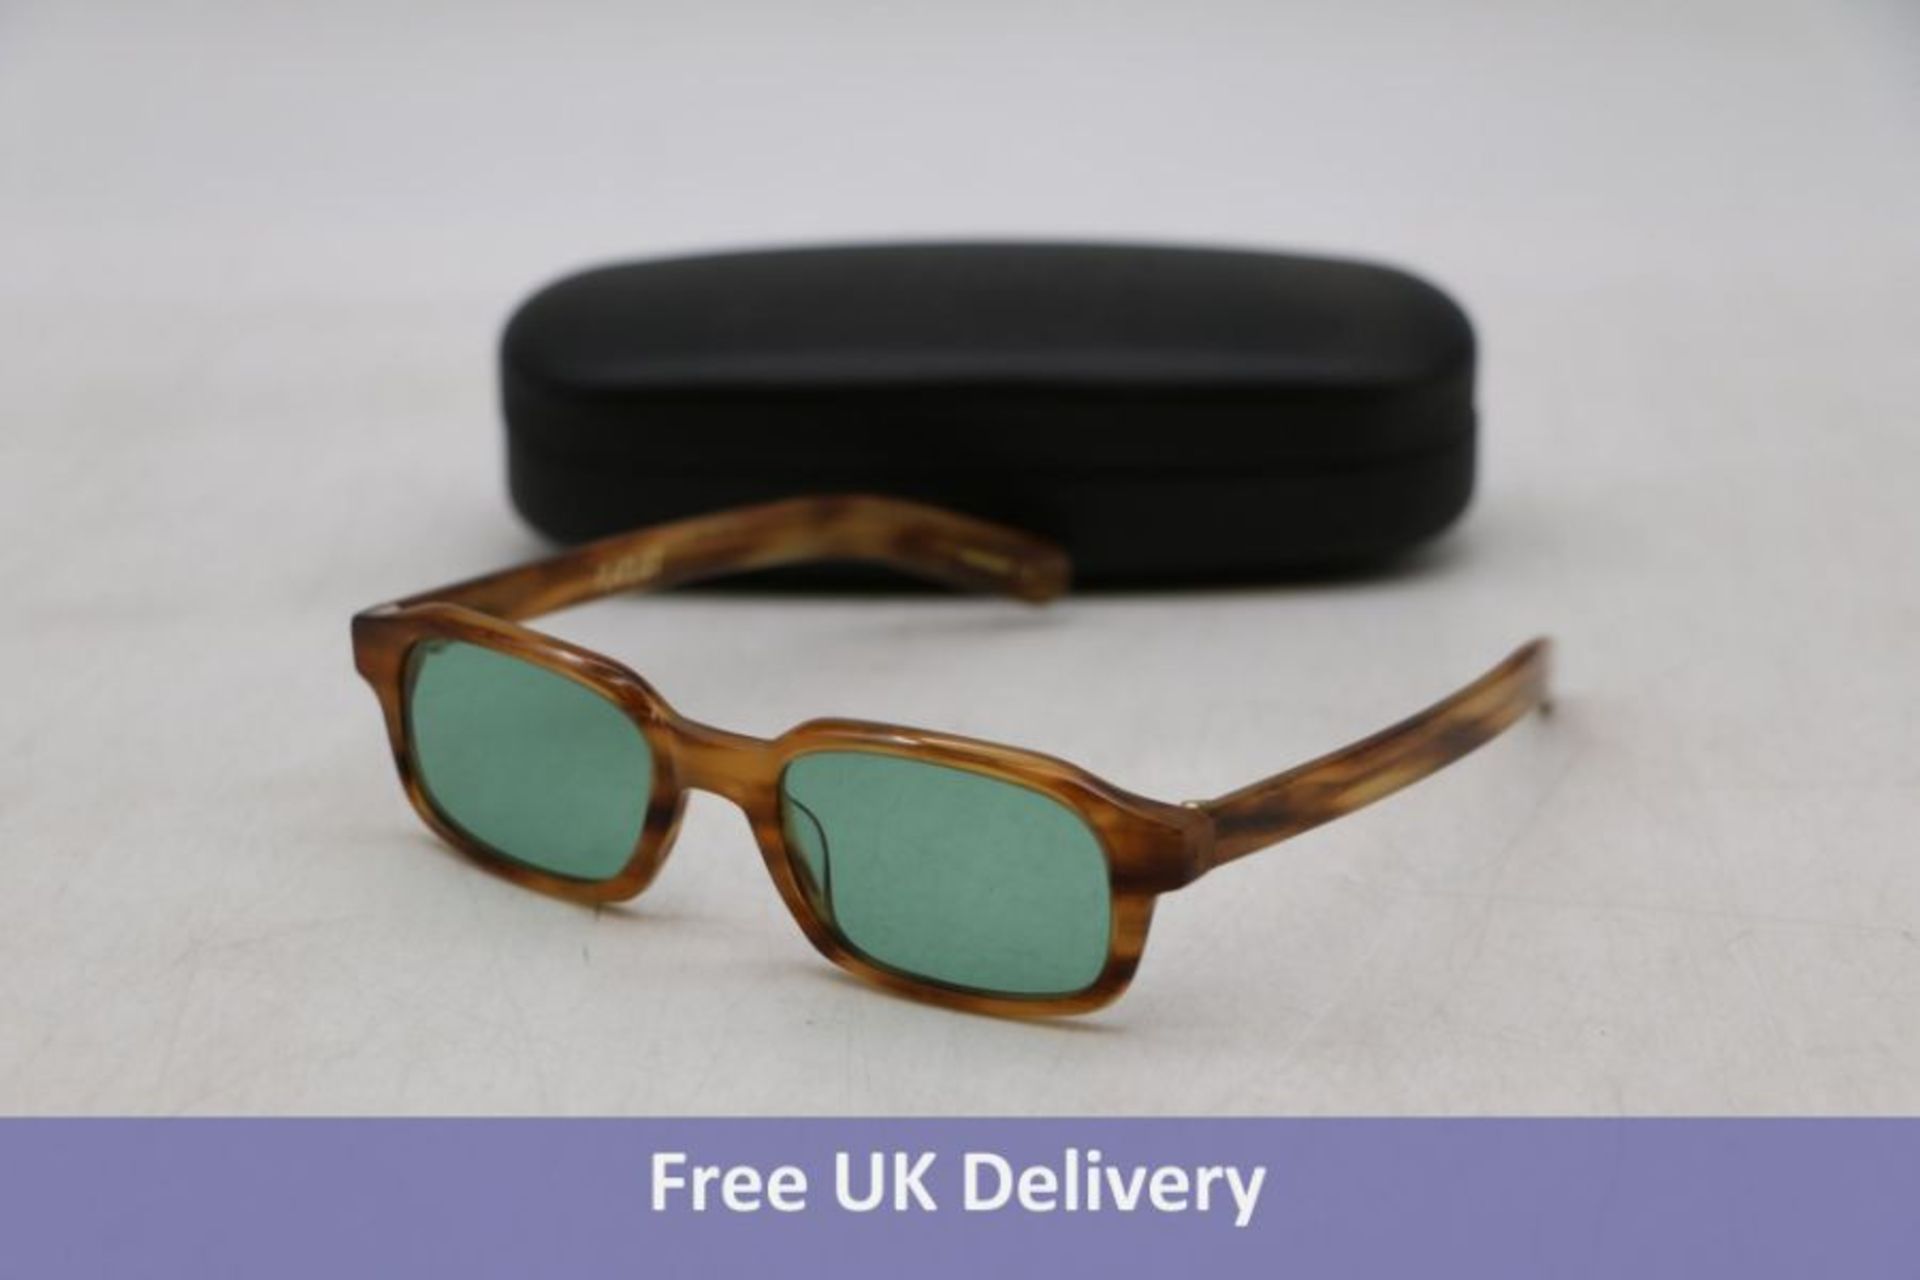 Flatlist Hanky Donegal Horn Sunglasses with Teal Lens